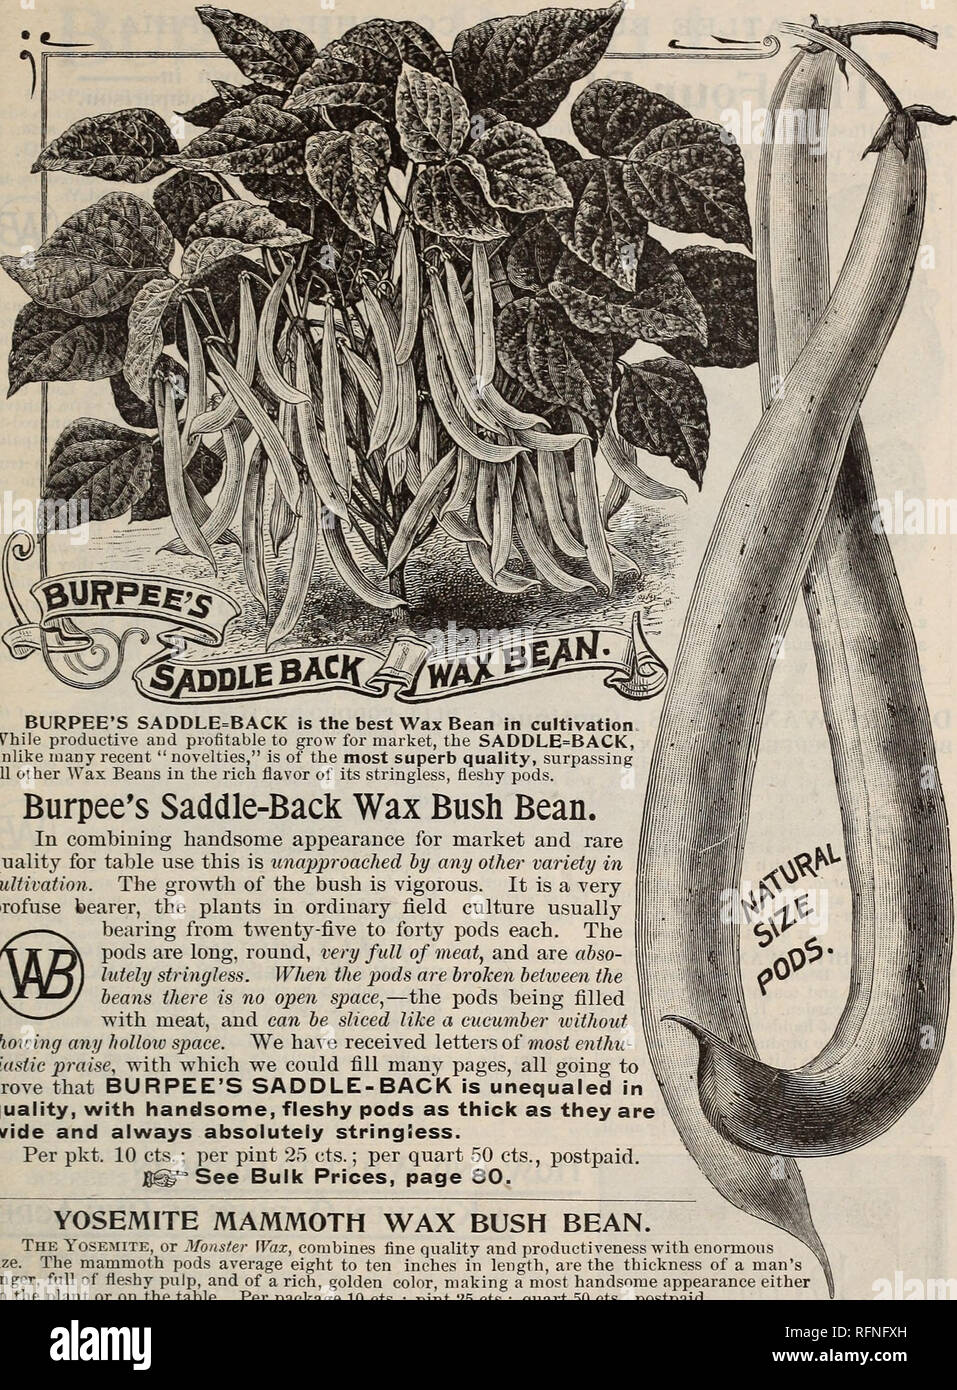 . Burpee's farm annual written at Fordhook Farm. Nurseries (Horticulture) Pennsylvania Philadelphia Catalogs; Vegetables Seeds Catalogs; Plants, Ornamental Catalogs; Flowers Seeds Catalogs. BURPEE'S SADDLE=BACK is the best Wax Bean in cultivation While productive and profitable to grow for market, the SADDLE=BACK, unlike niaDy recent &quot; novelties,&quot; is of the most superb quality, surpassin all other Wax Beans in the rich flavor of its stringless, fleshy pods. Burpee's Saddle-Back Wax Bush Bean. In combining handsome appearance for market and rare quality for table use this is unapproac Stock Photo